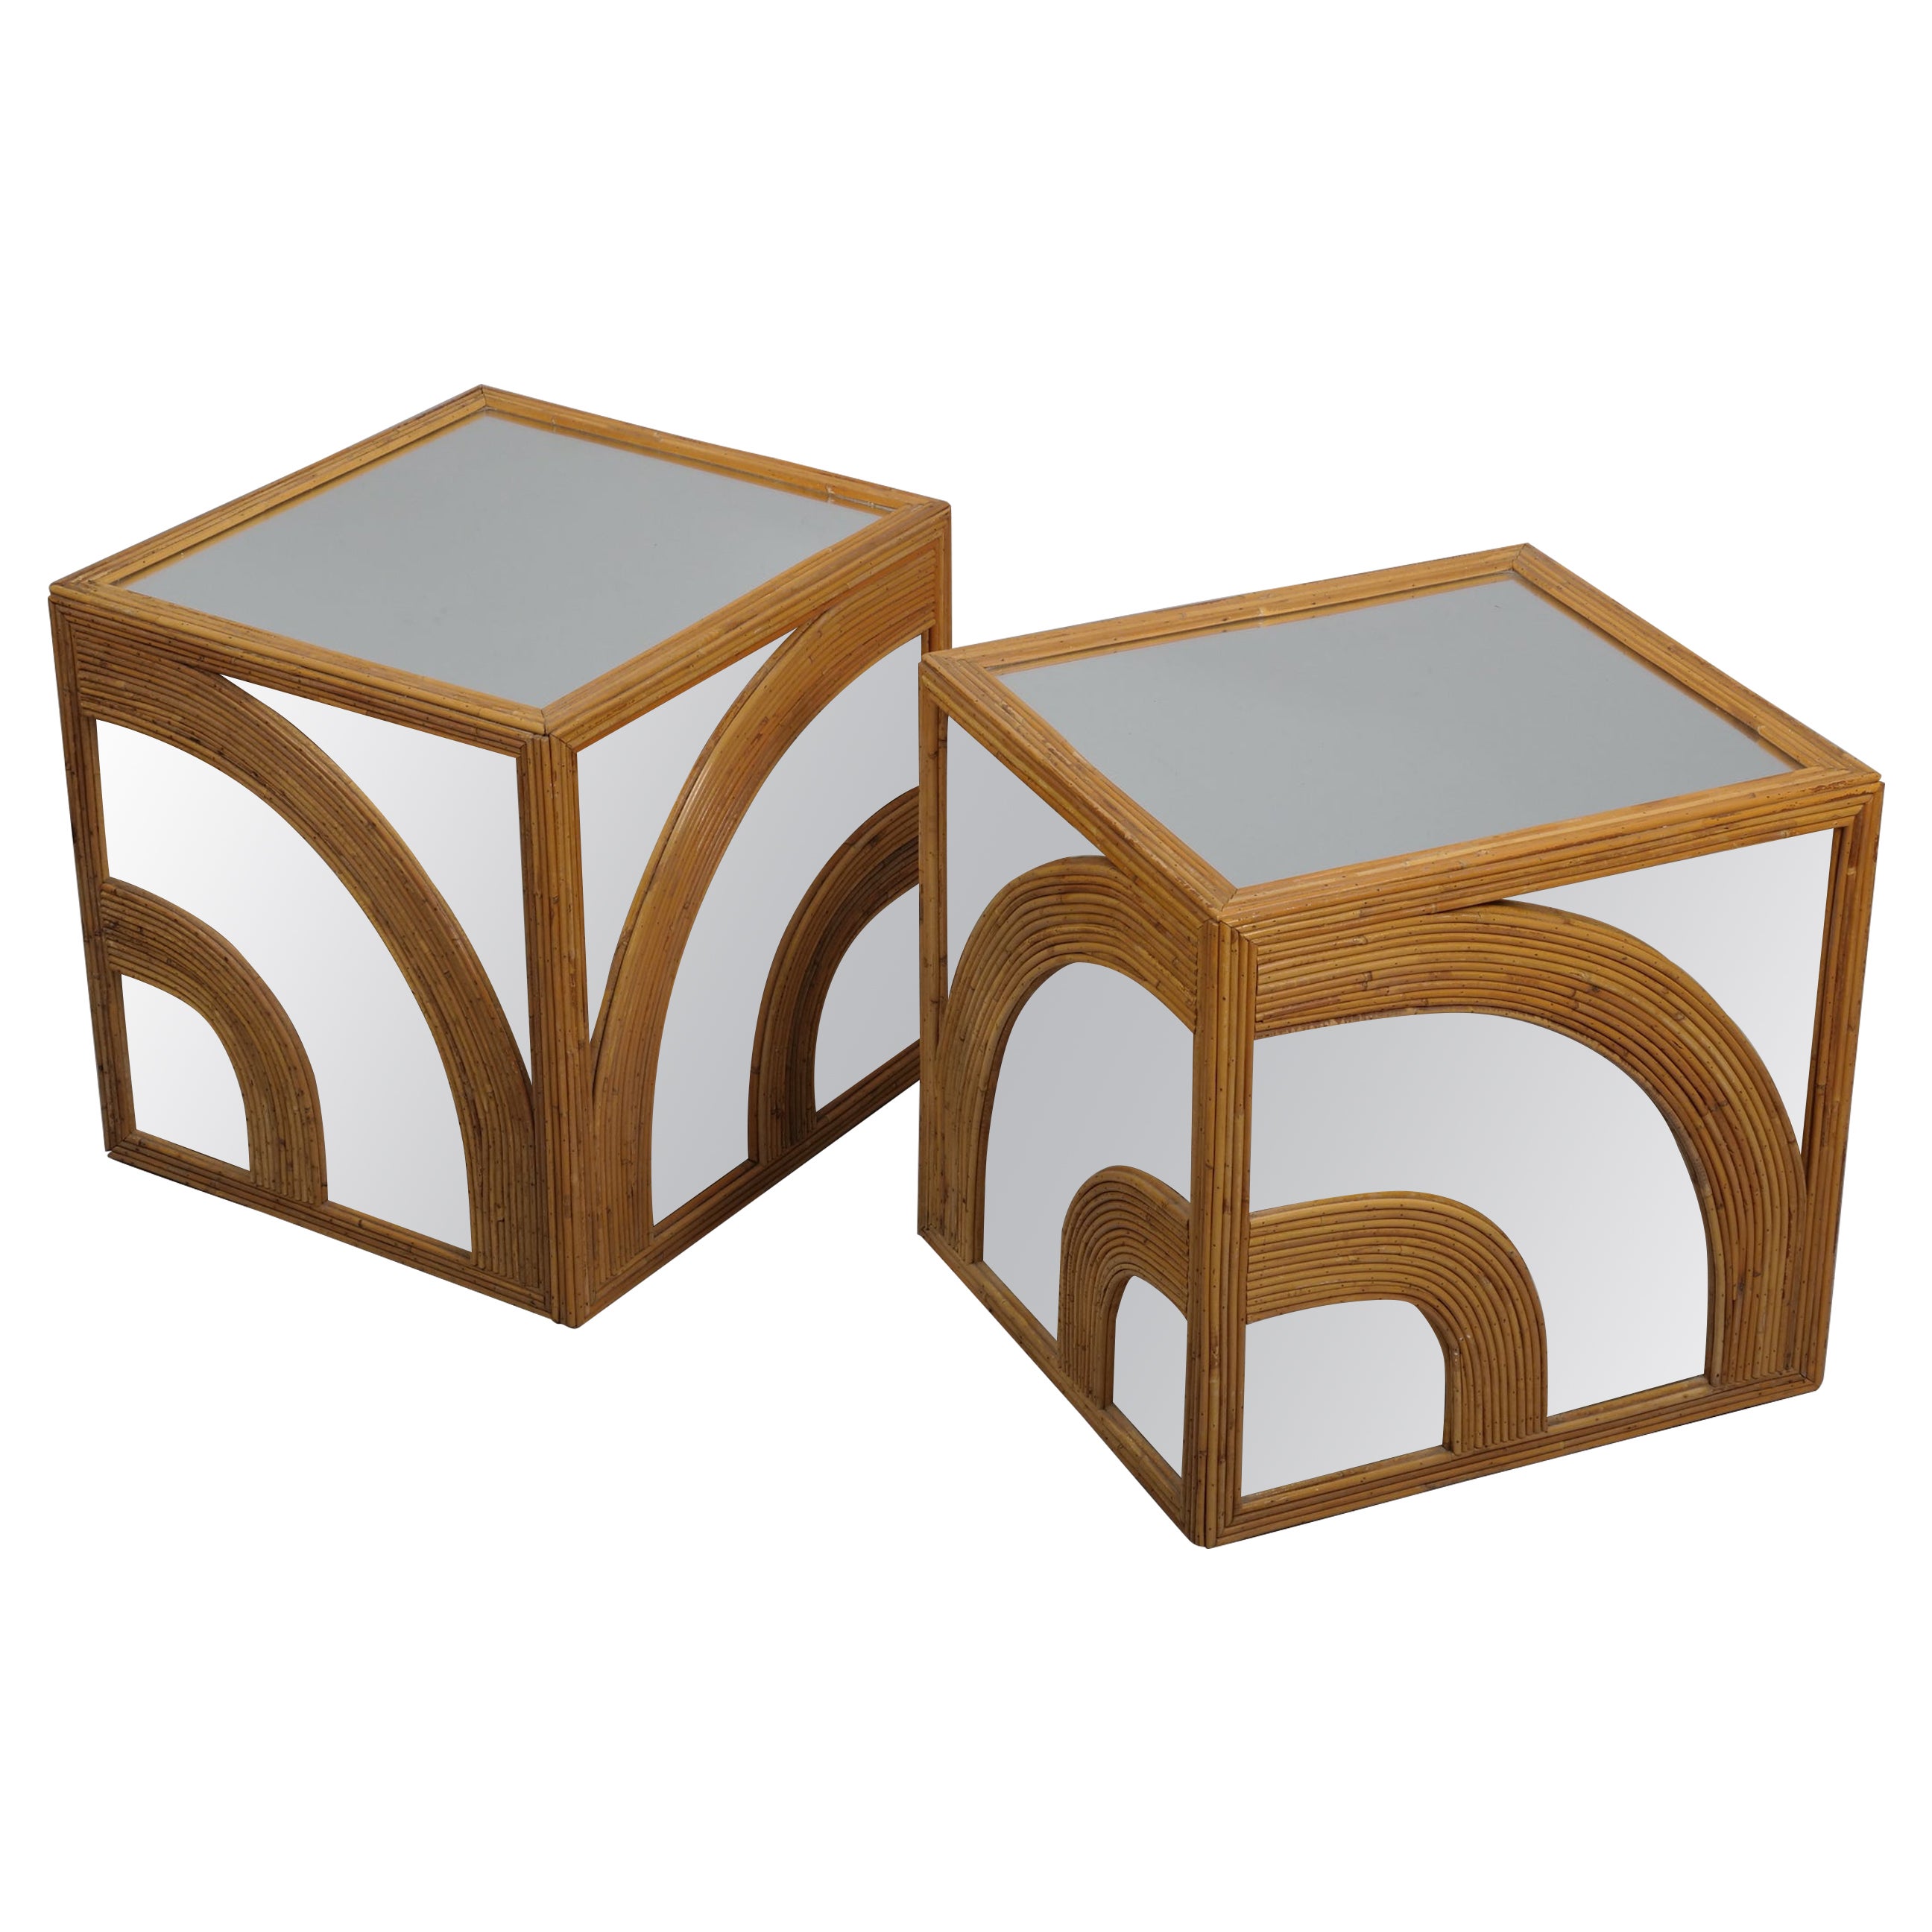 Pair of Vivai del Sud cane and mirror cube tables c1970 For Sale